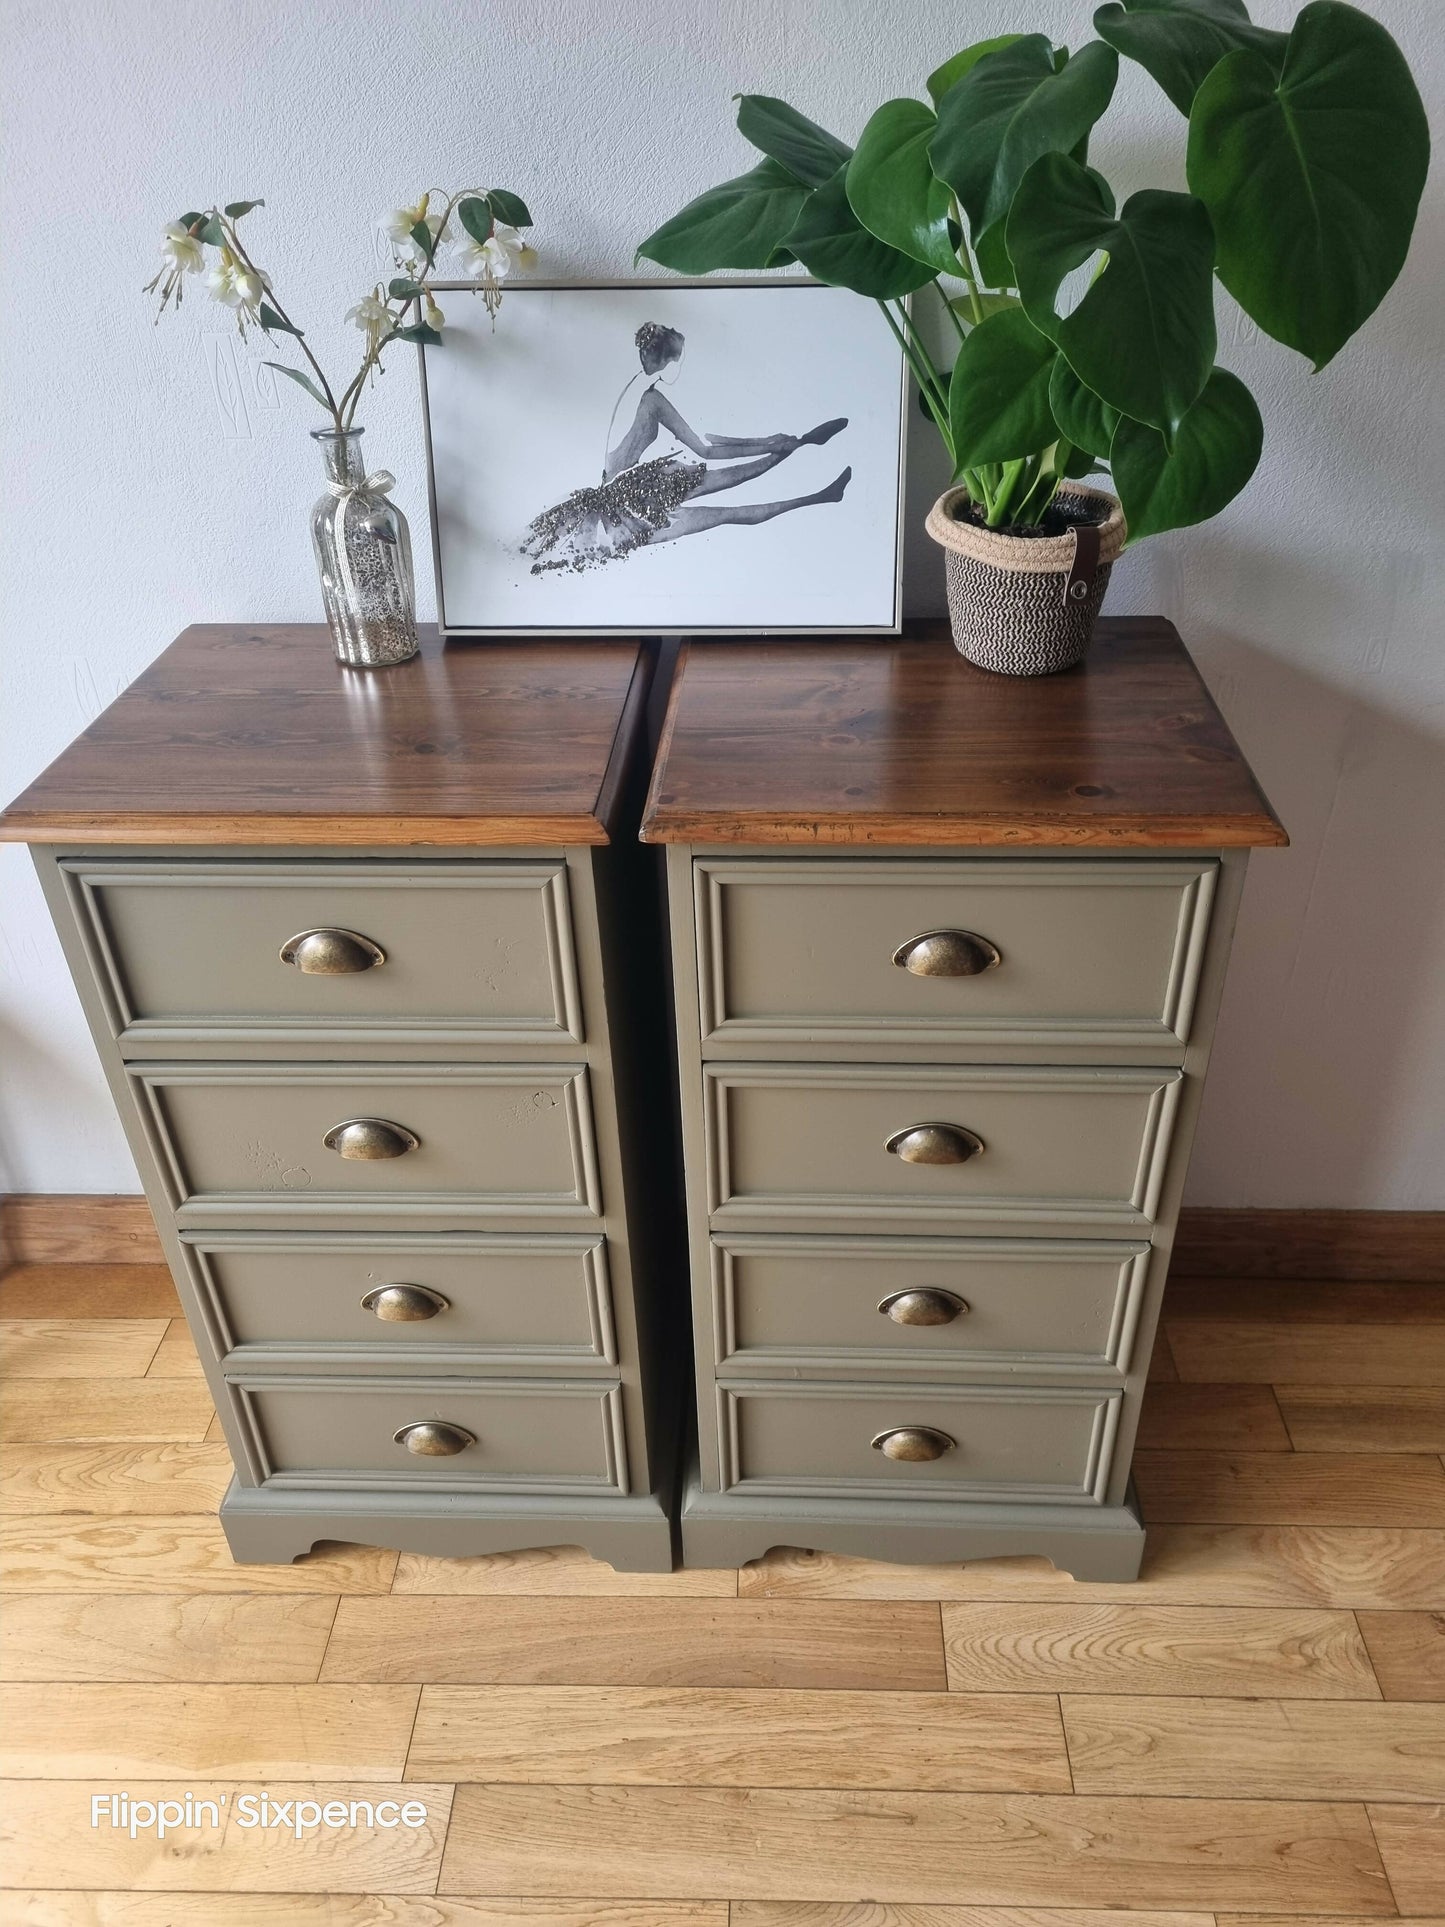 Pair of Vintage Drawers finished in a Classic Hampton Olive Green with Stunning Wood Tops